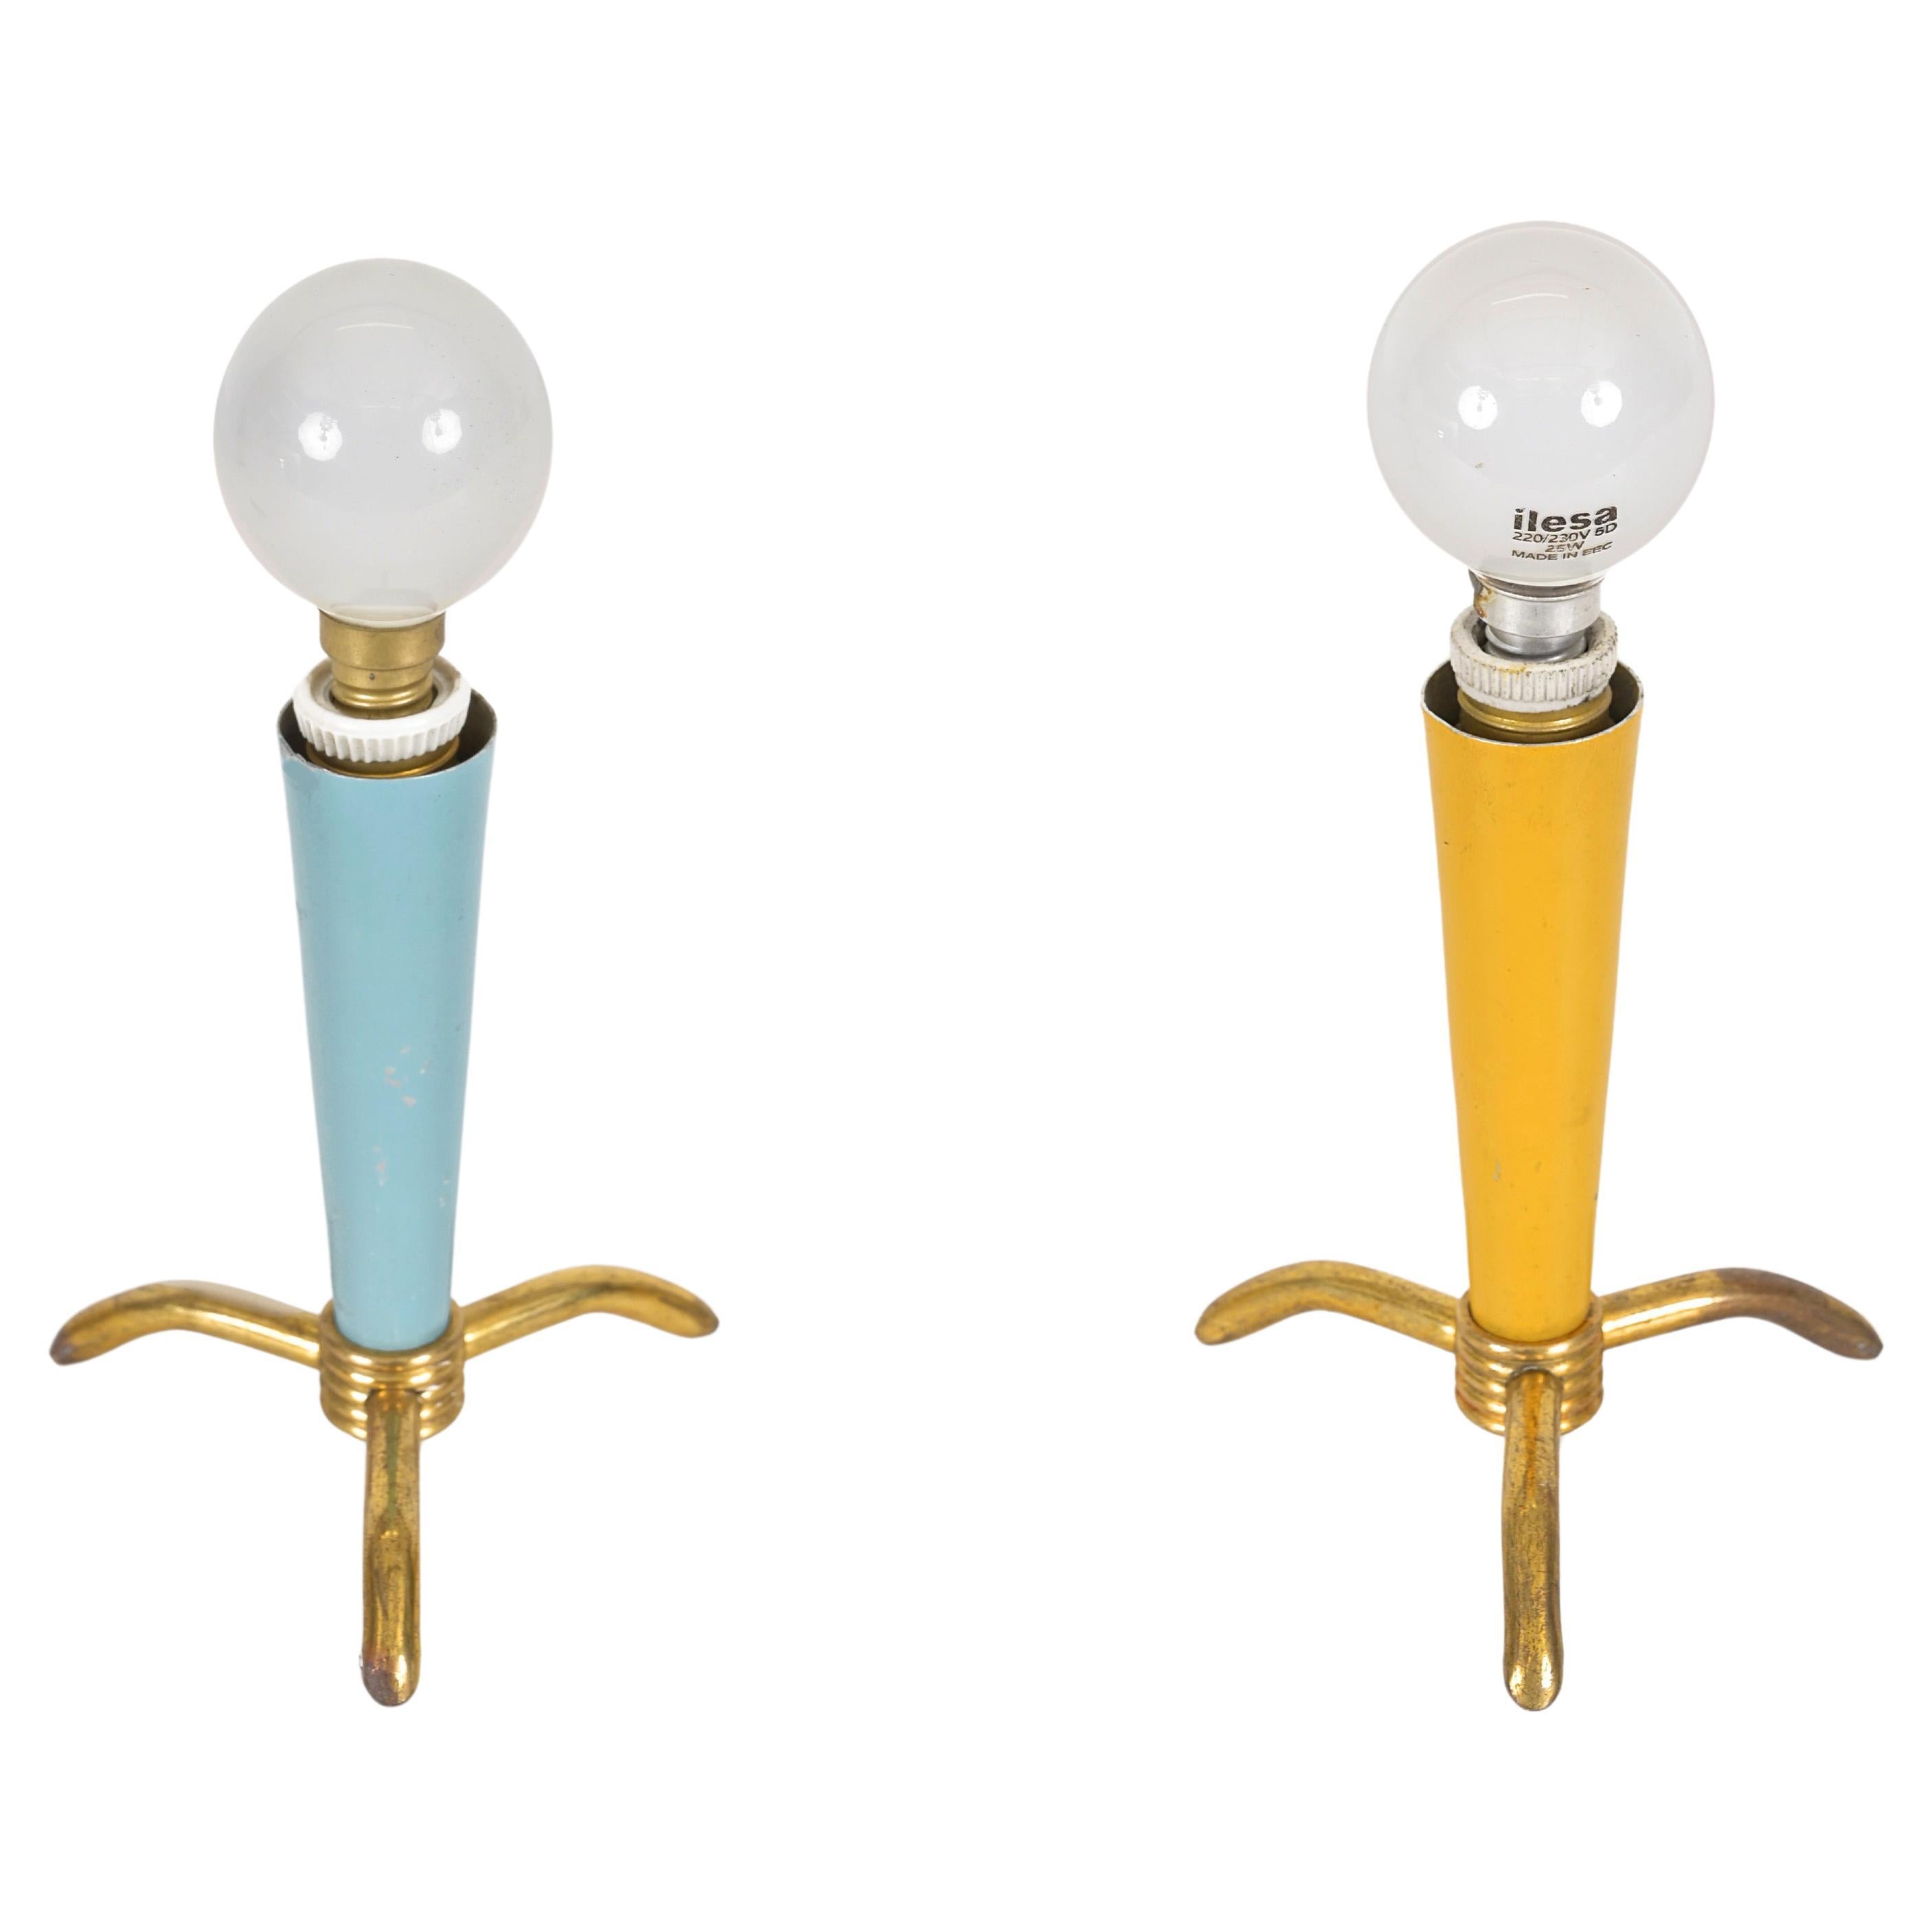 Pairs of Italian Table Lamps in Brass, Yellow and Tiffany Metal, Stilnovo, 1950s For Sale